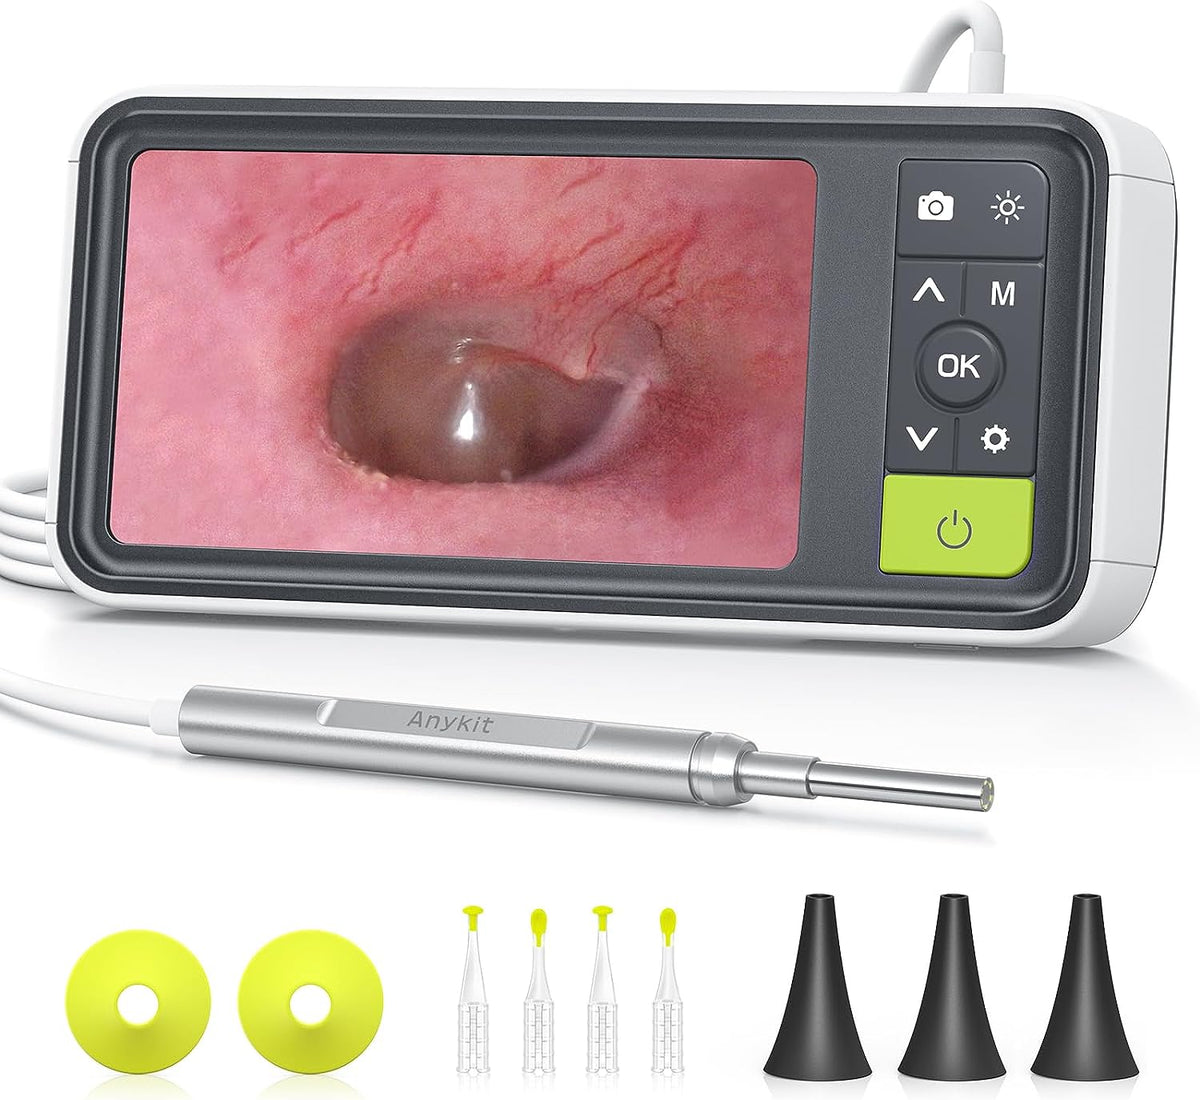 Anykit Digital Otoscope with Gyroscope, 4.5 Inches Screen, 3.9mm Ear Scope Camera with 6 Lights, Ear Wax Removal Tool, 32GB Card, Supports Photo Snap and Video Recording